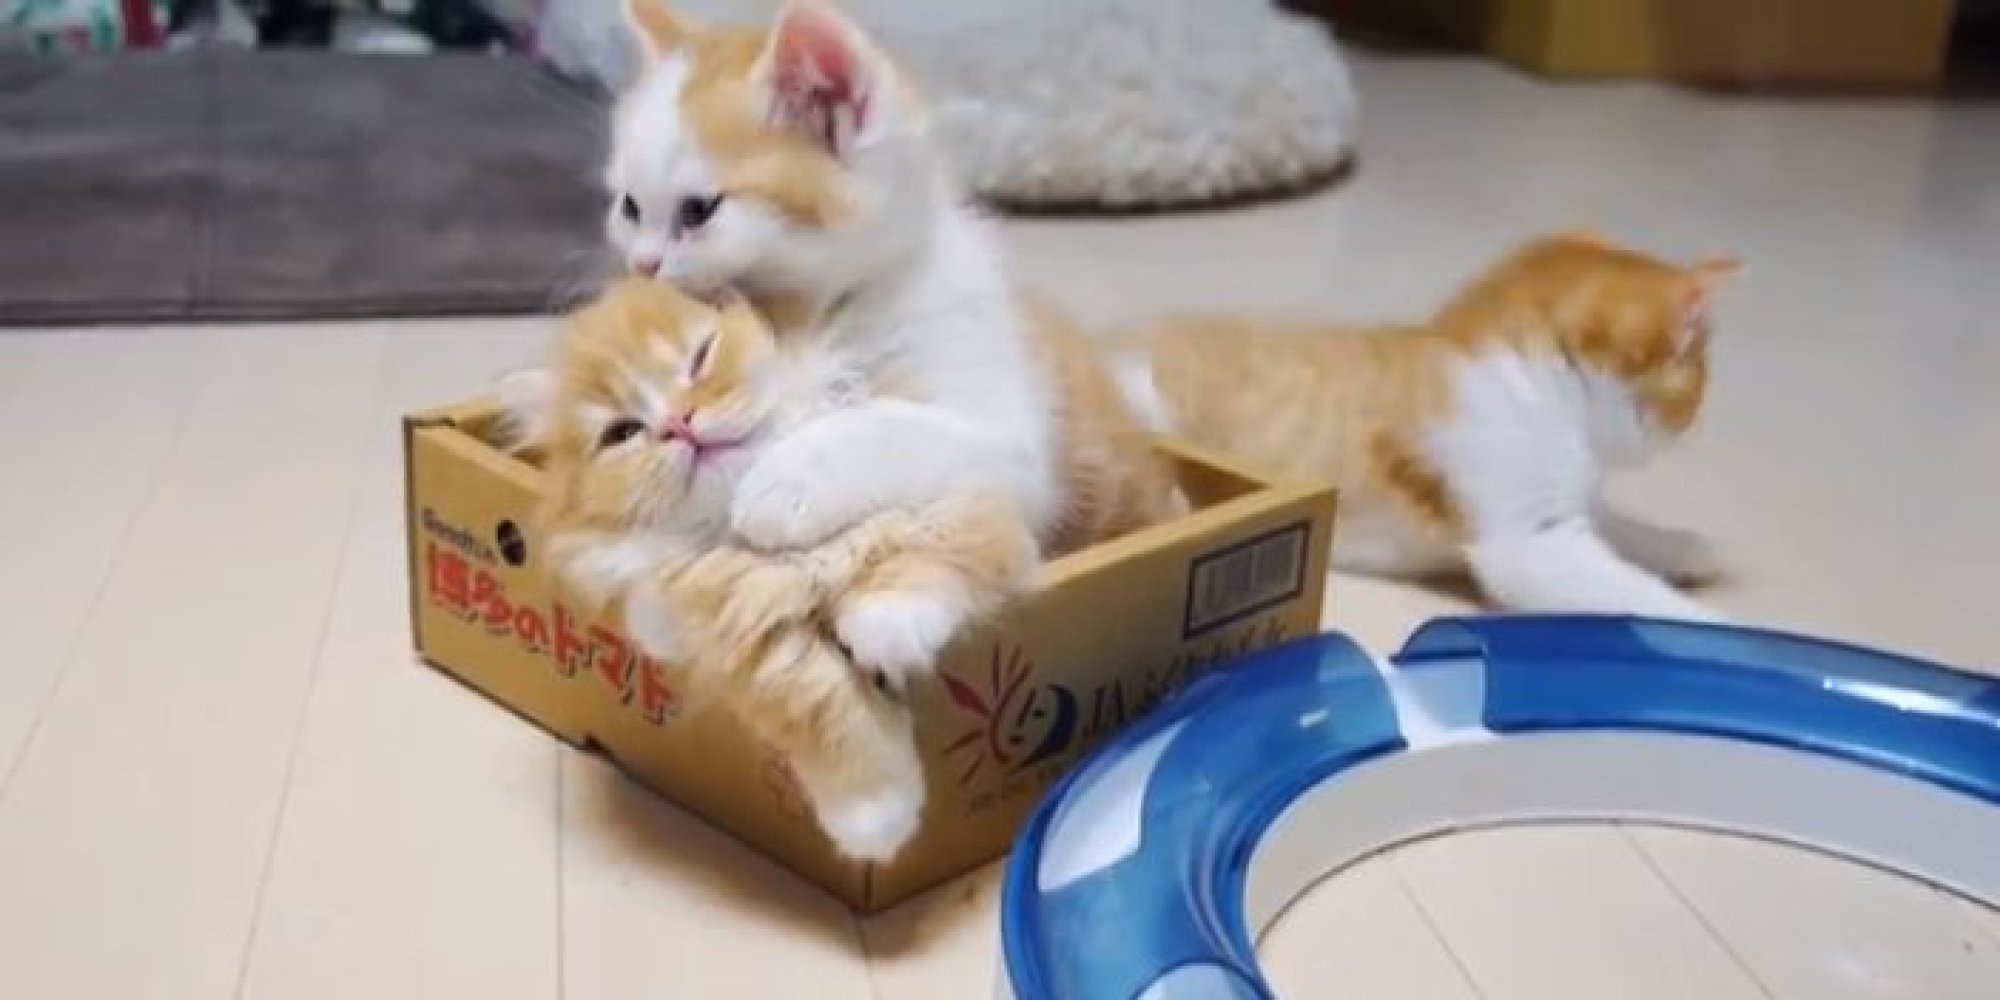 These 3 Munchkin Kittens Playing In A Box Are Motivating Us On A Monday